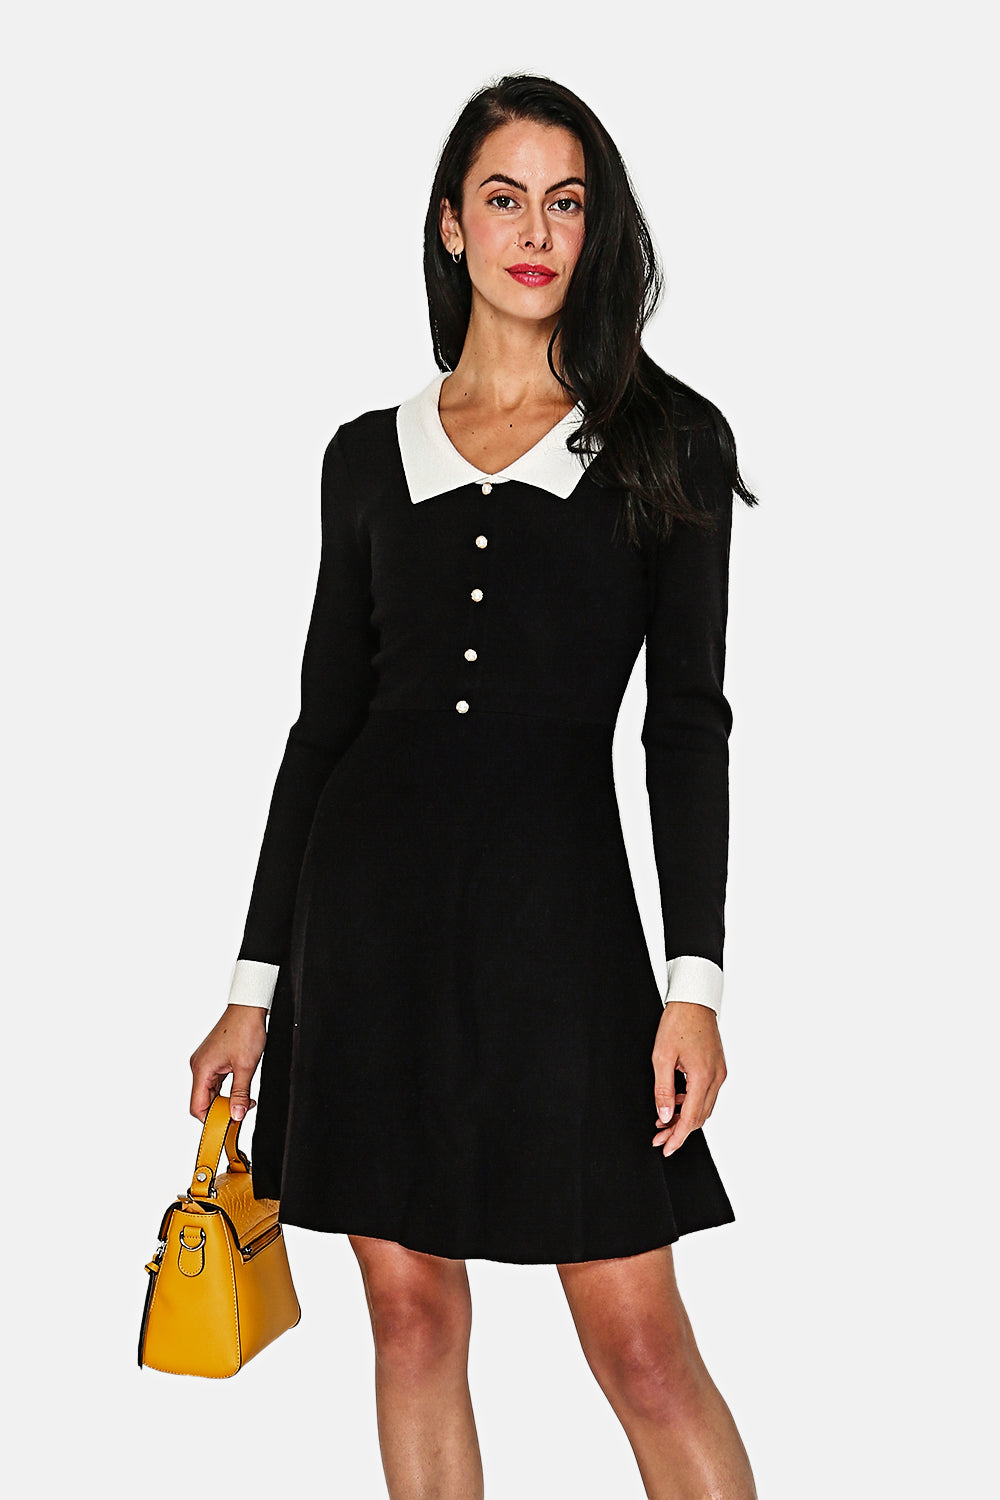 Black dress with white collar pearl buttons in front